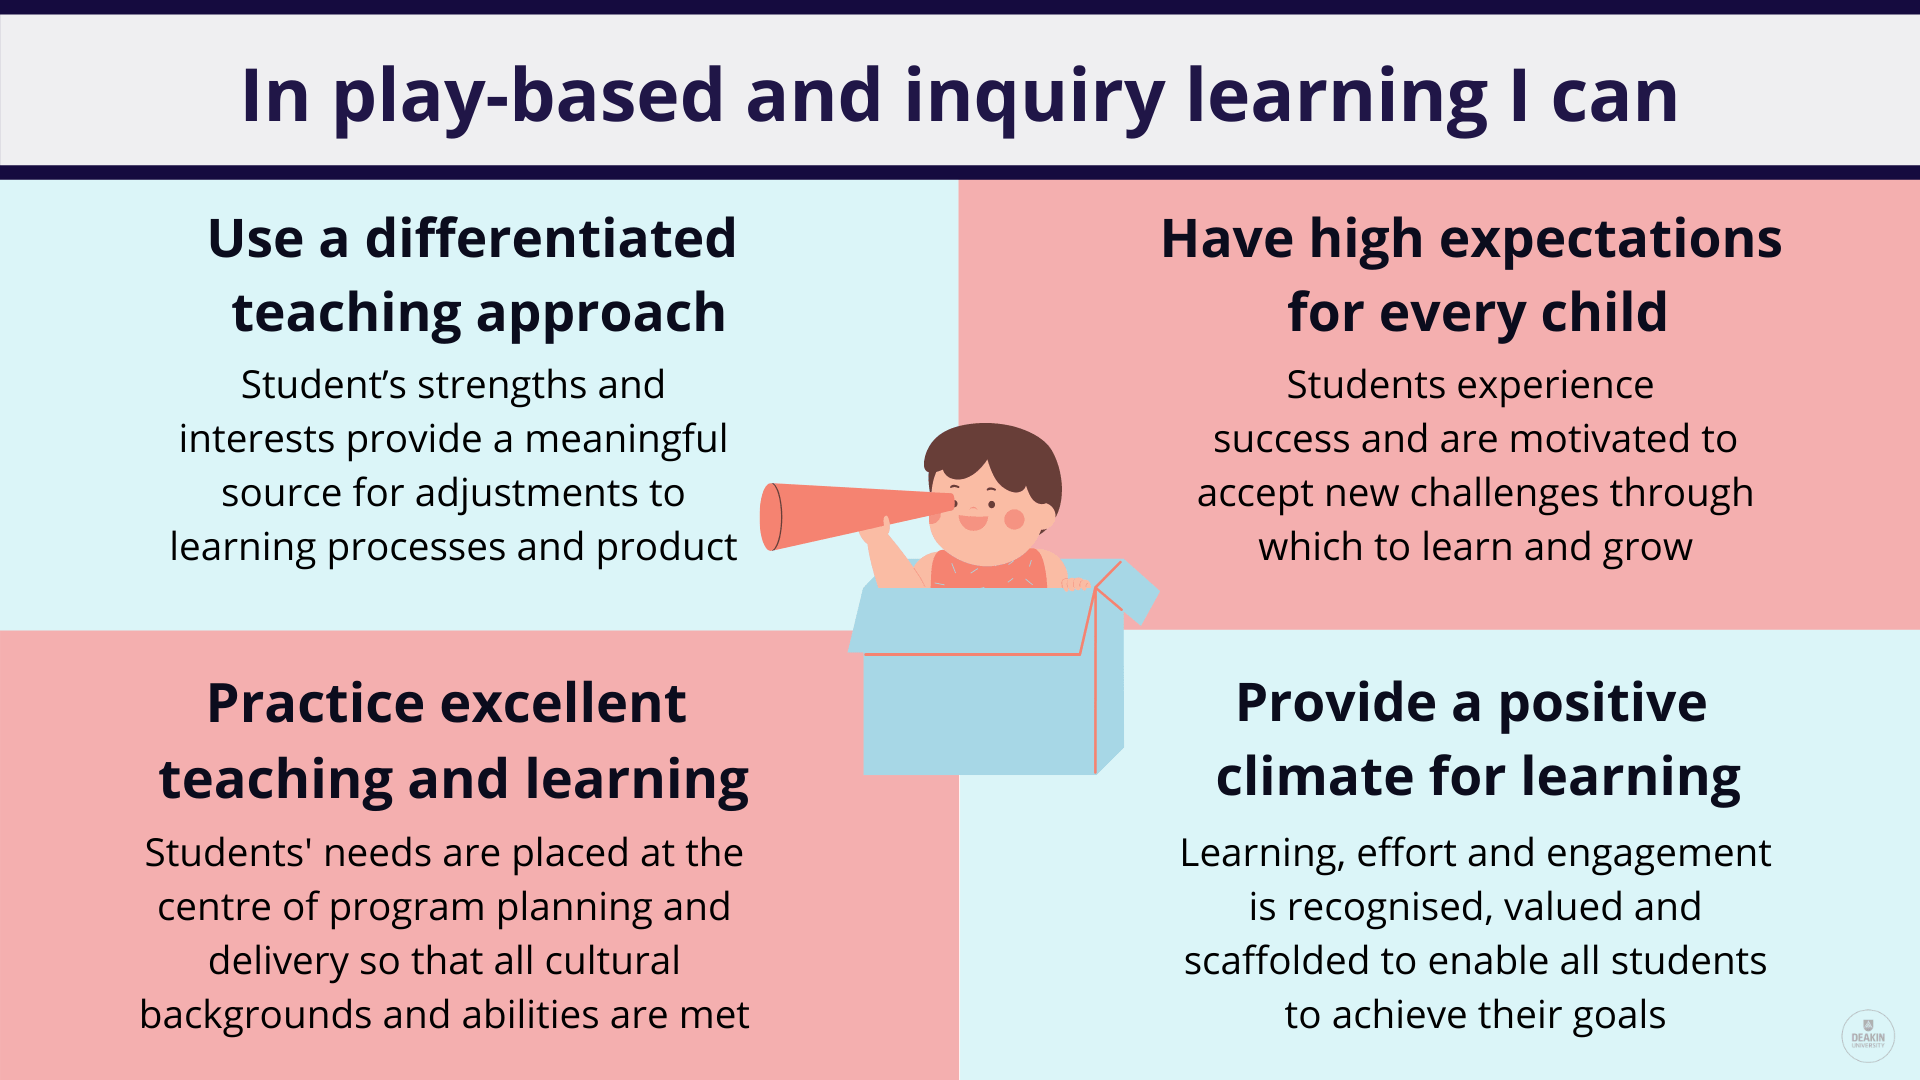 Play-based learning principles